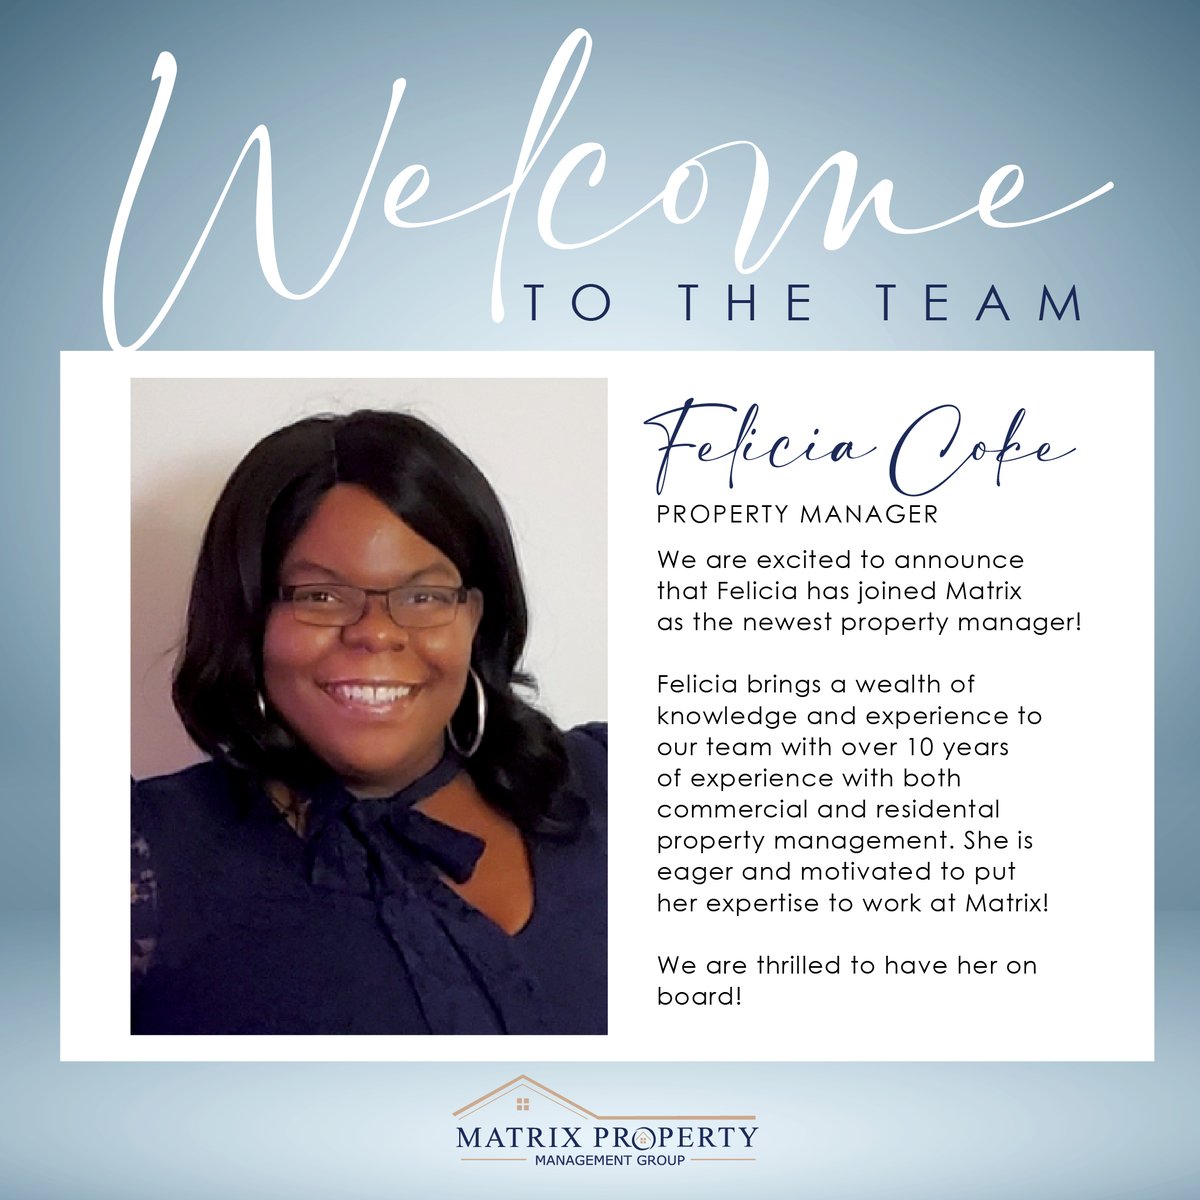 We are so excited to welcome Felicia to our team! Great things are ahead as we continue to grow!

#propertymanager #propertymanagement #communitymanager #communitymanagement #njpropertymanagement #hoa #hoamanagement #homeownersassociation #homeownersassociationsupport #welcome